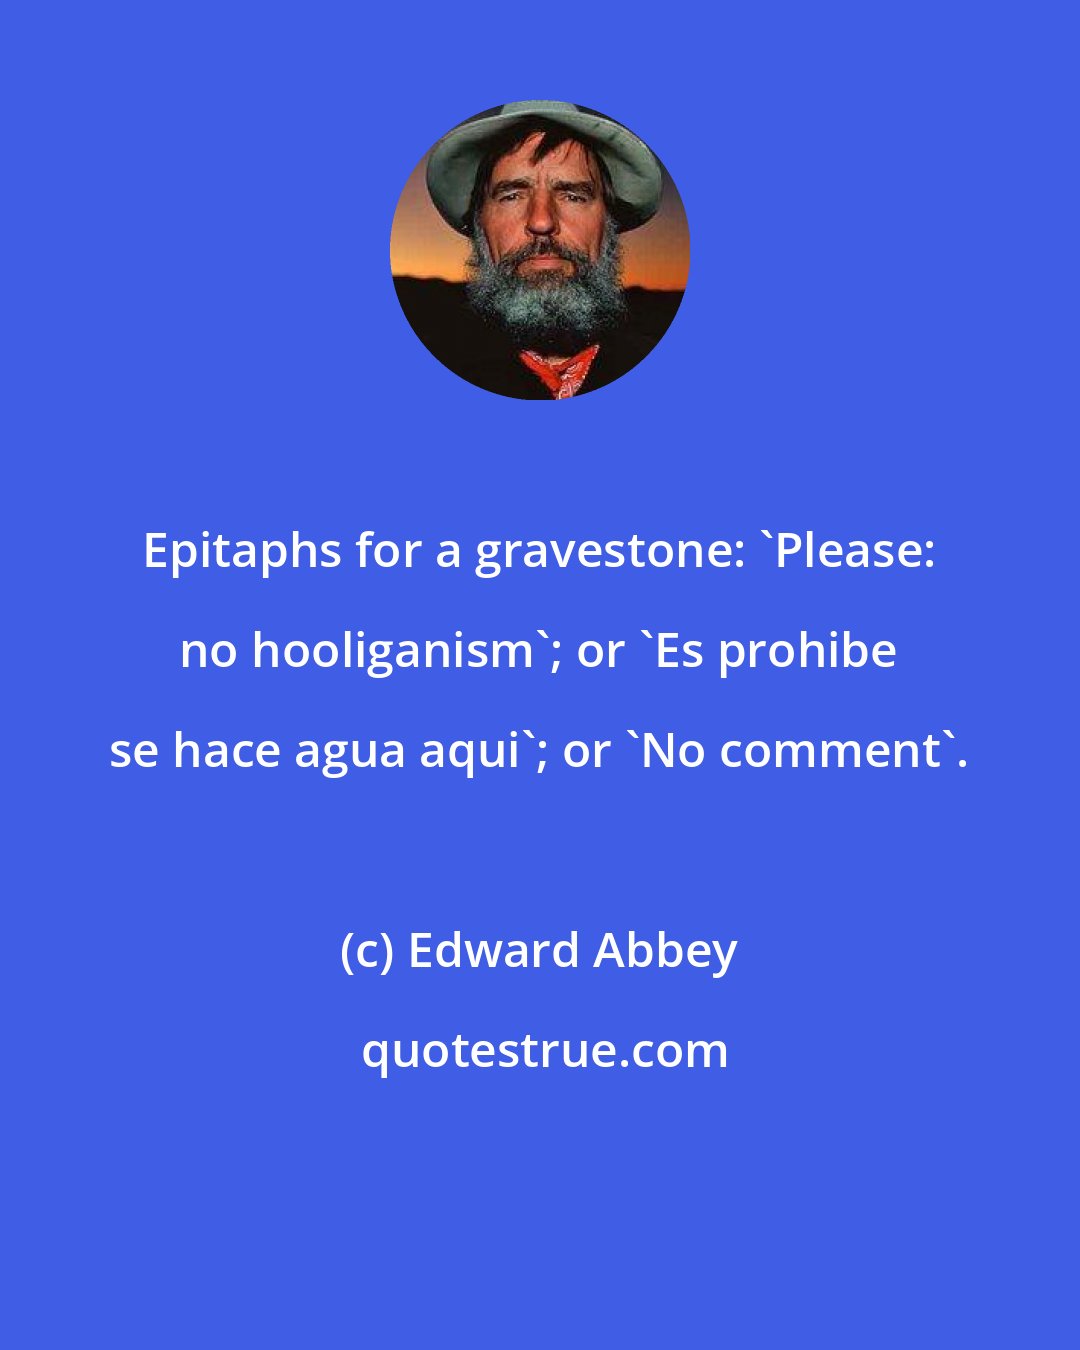 Edward Abbey: Epitaphs for a gravestone: 'Please: no hooliganism'; or 'Es prohibe se hace agua aqui'; or 'No comment'.